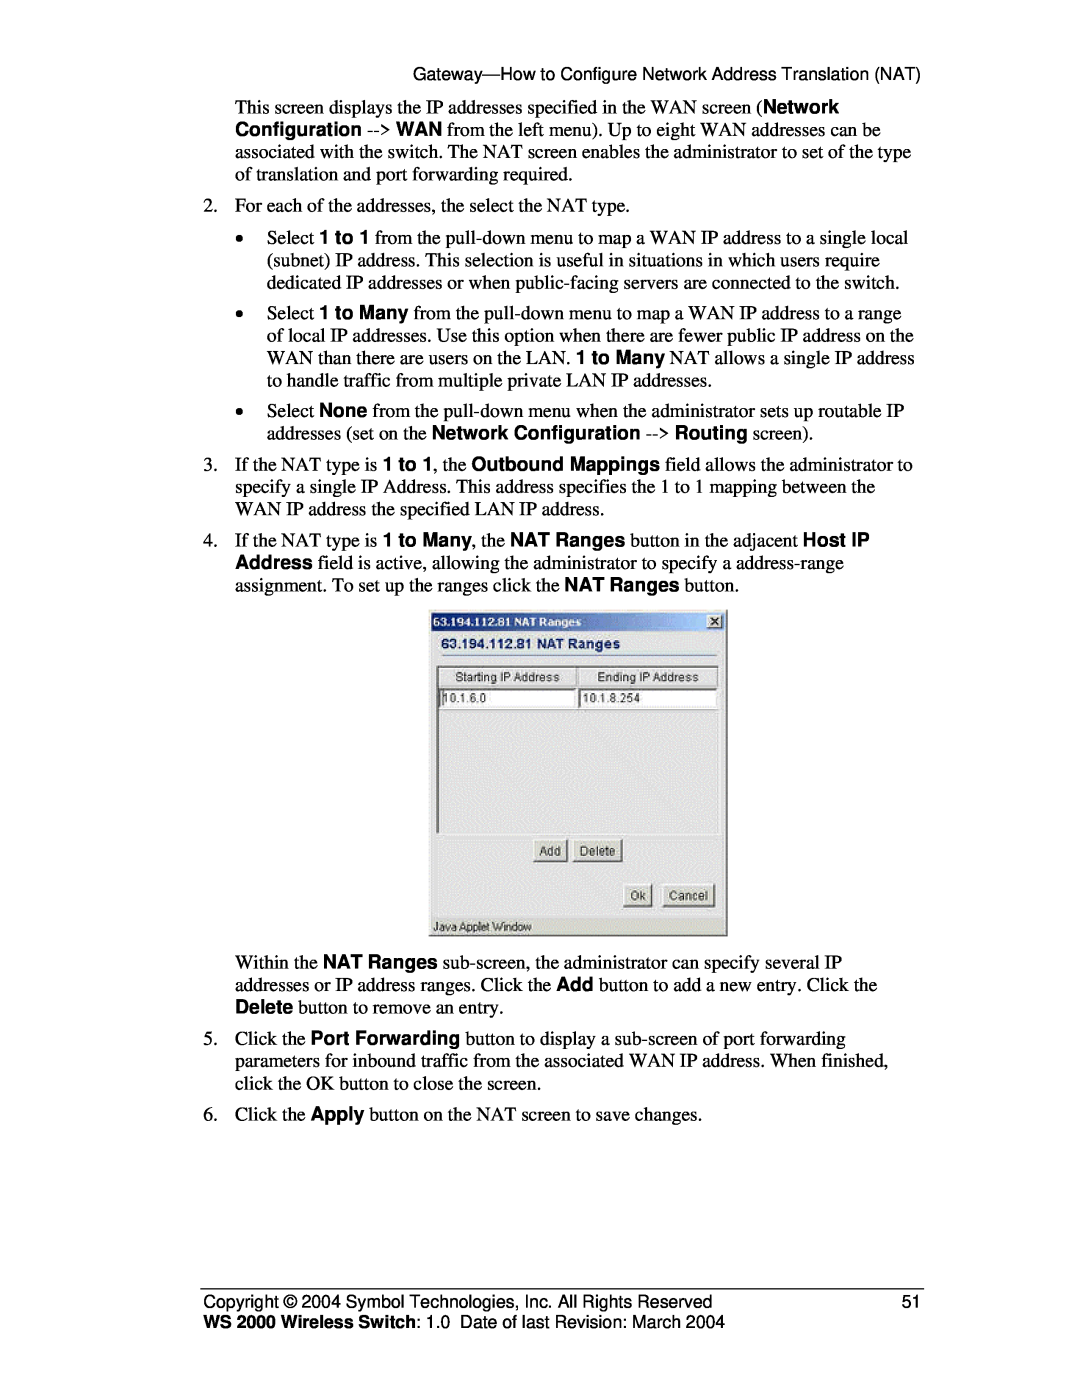 Symbol Technologies WS 2000 manual For each of the addresses, the select the NAT type 